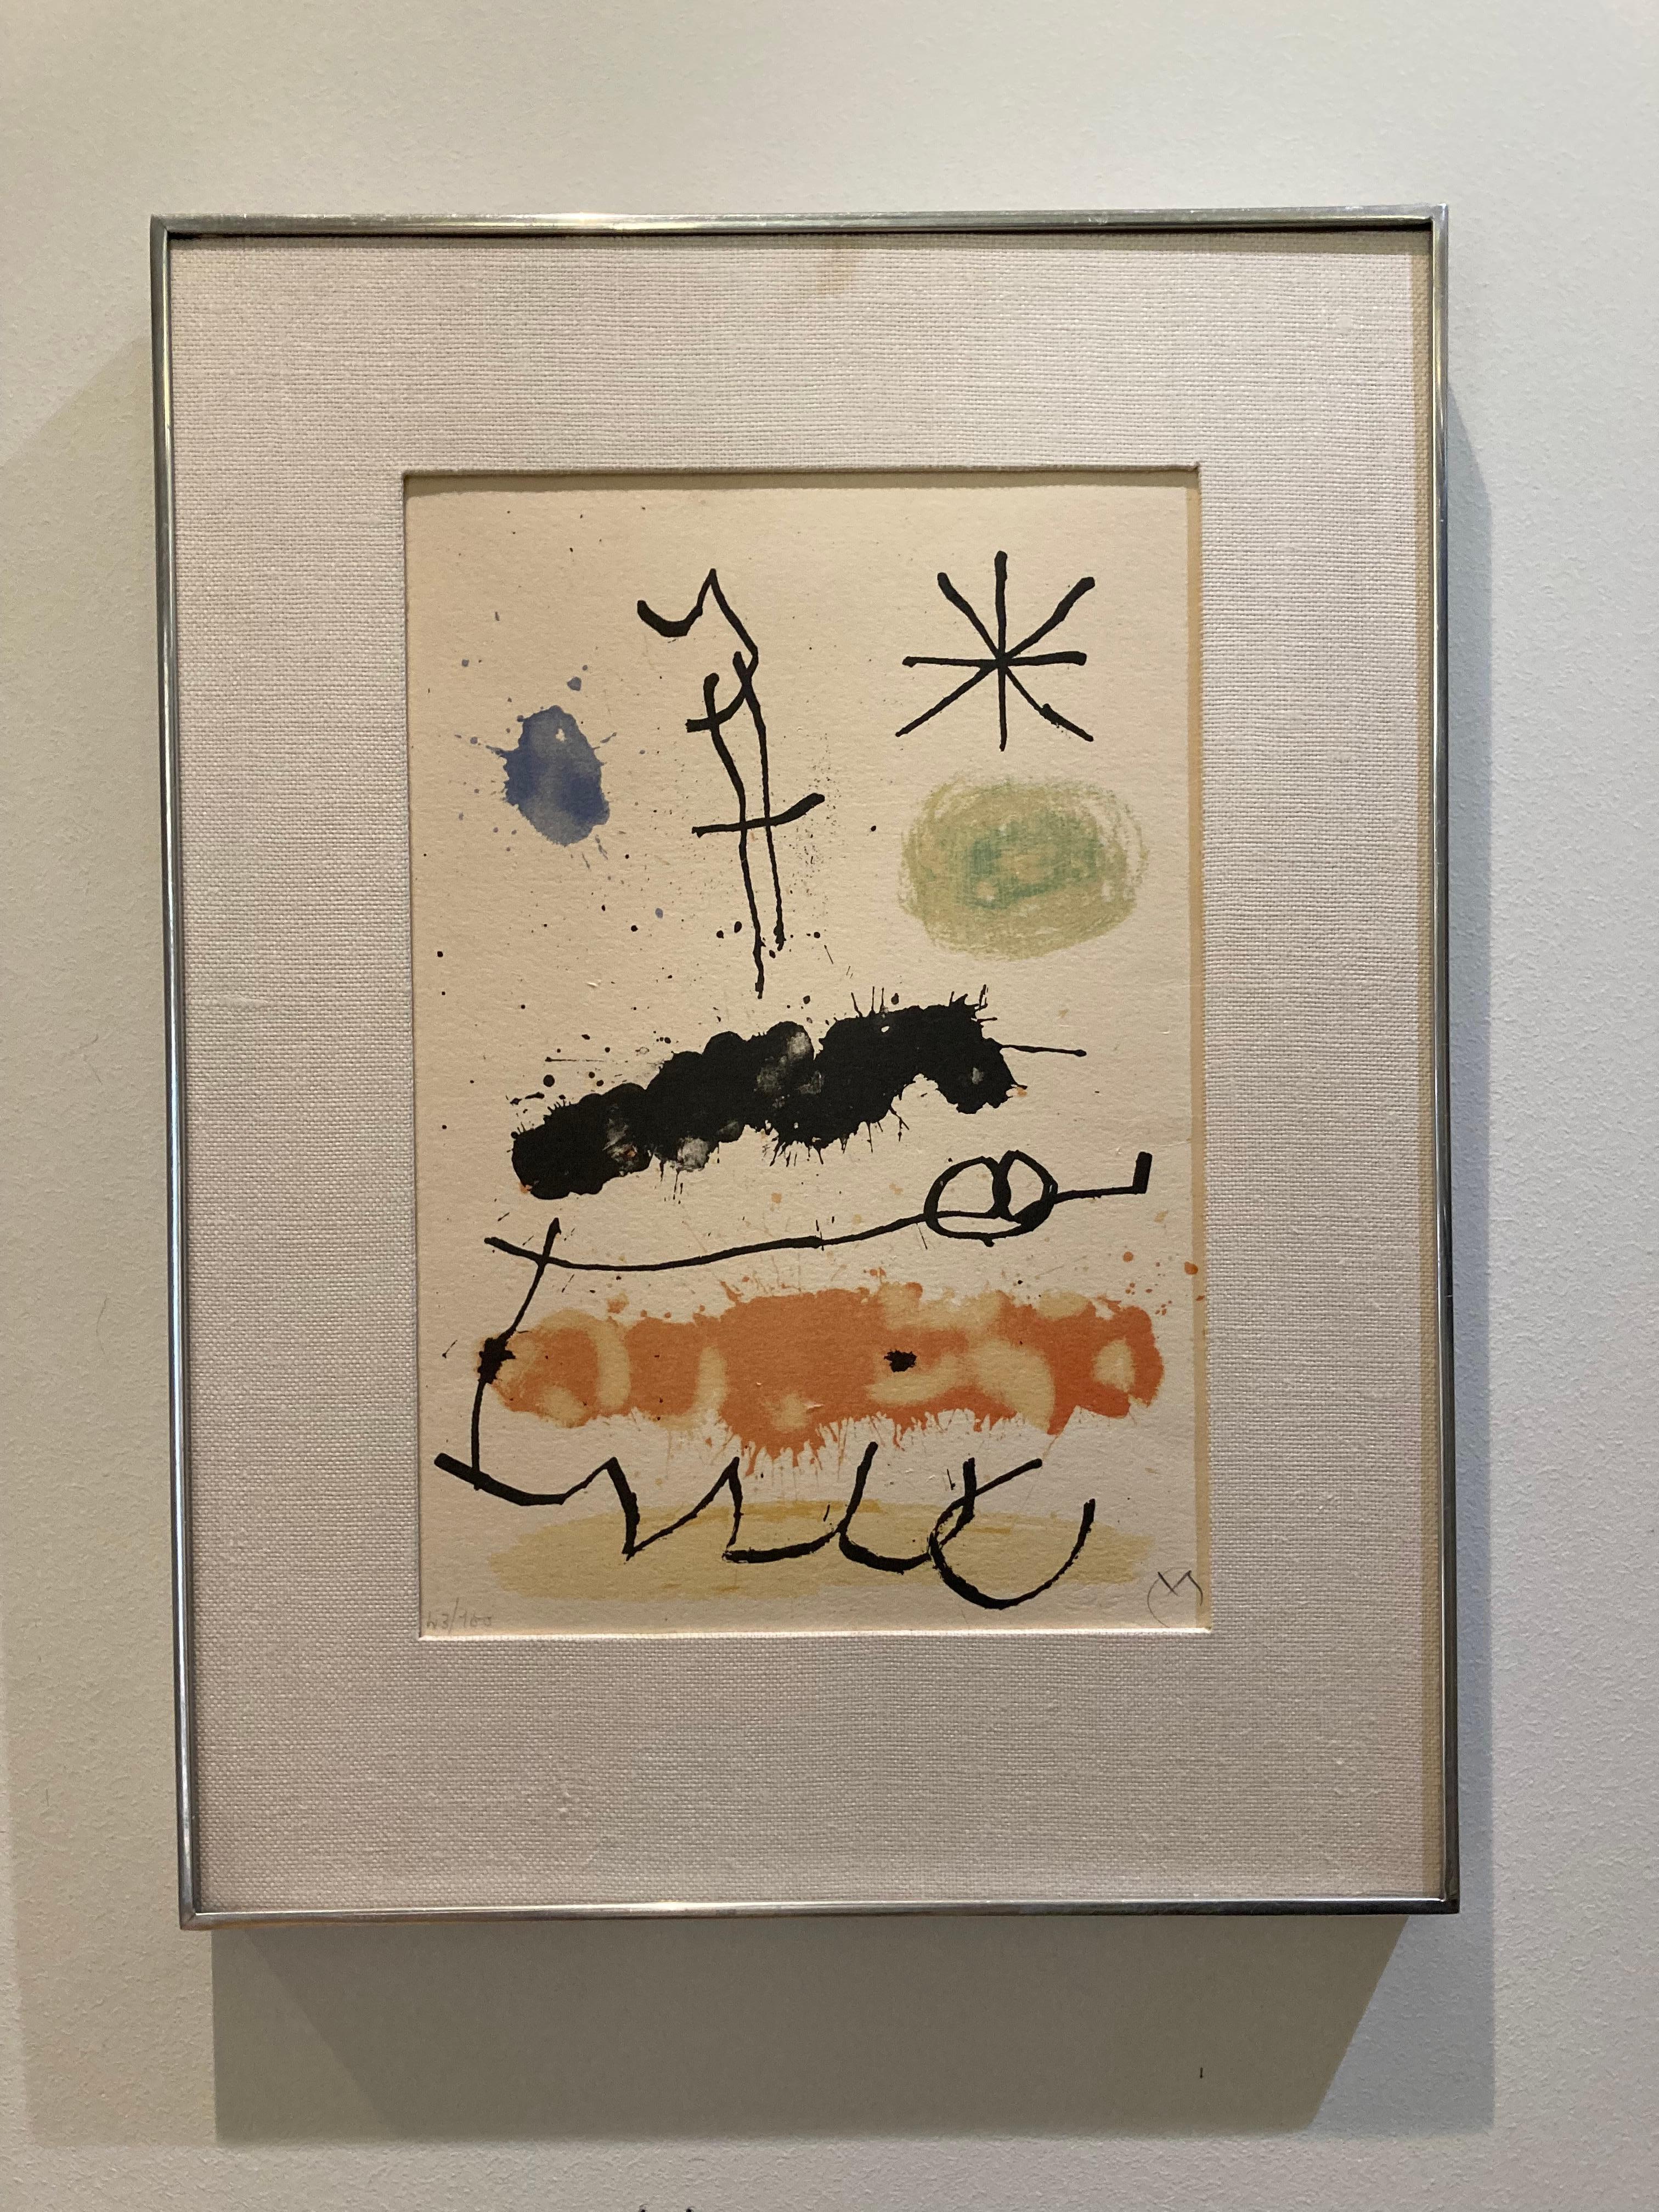 'Abstract Landscape with Star, ' by Joan Miro,  Four-color Lithograph. - Print by Joan Miró